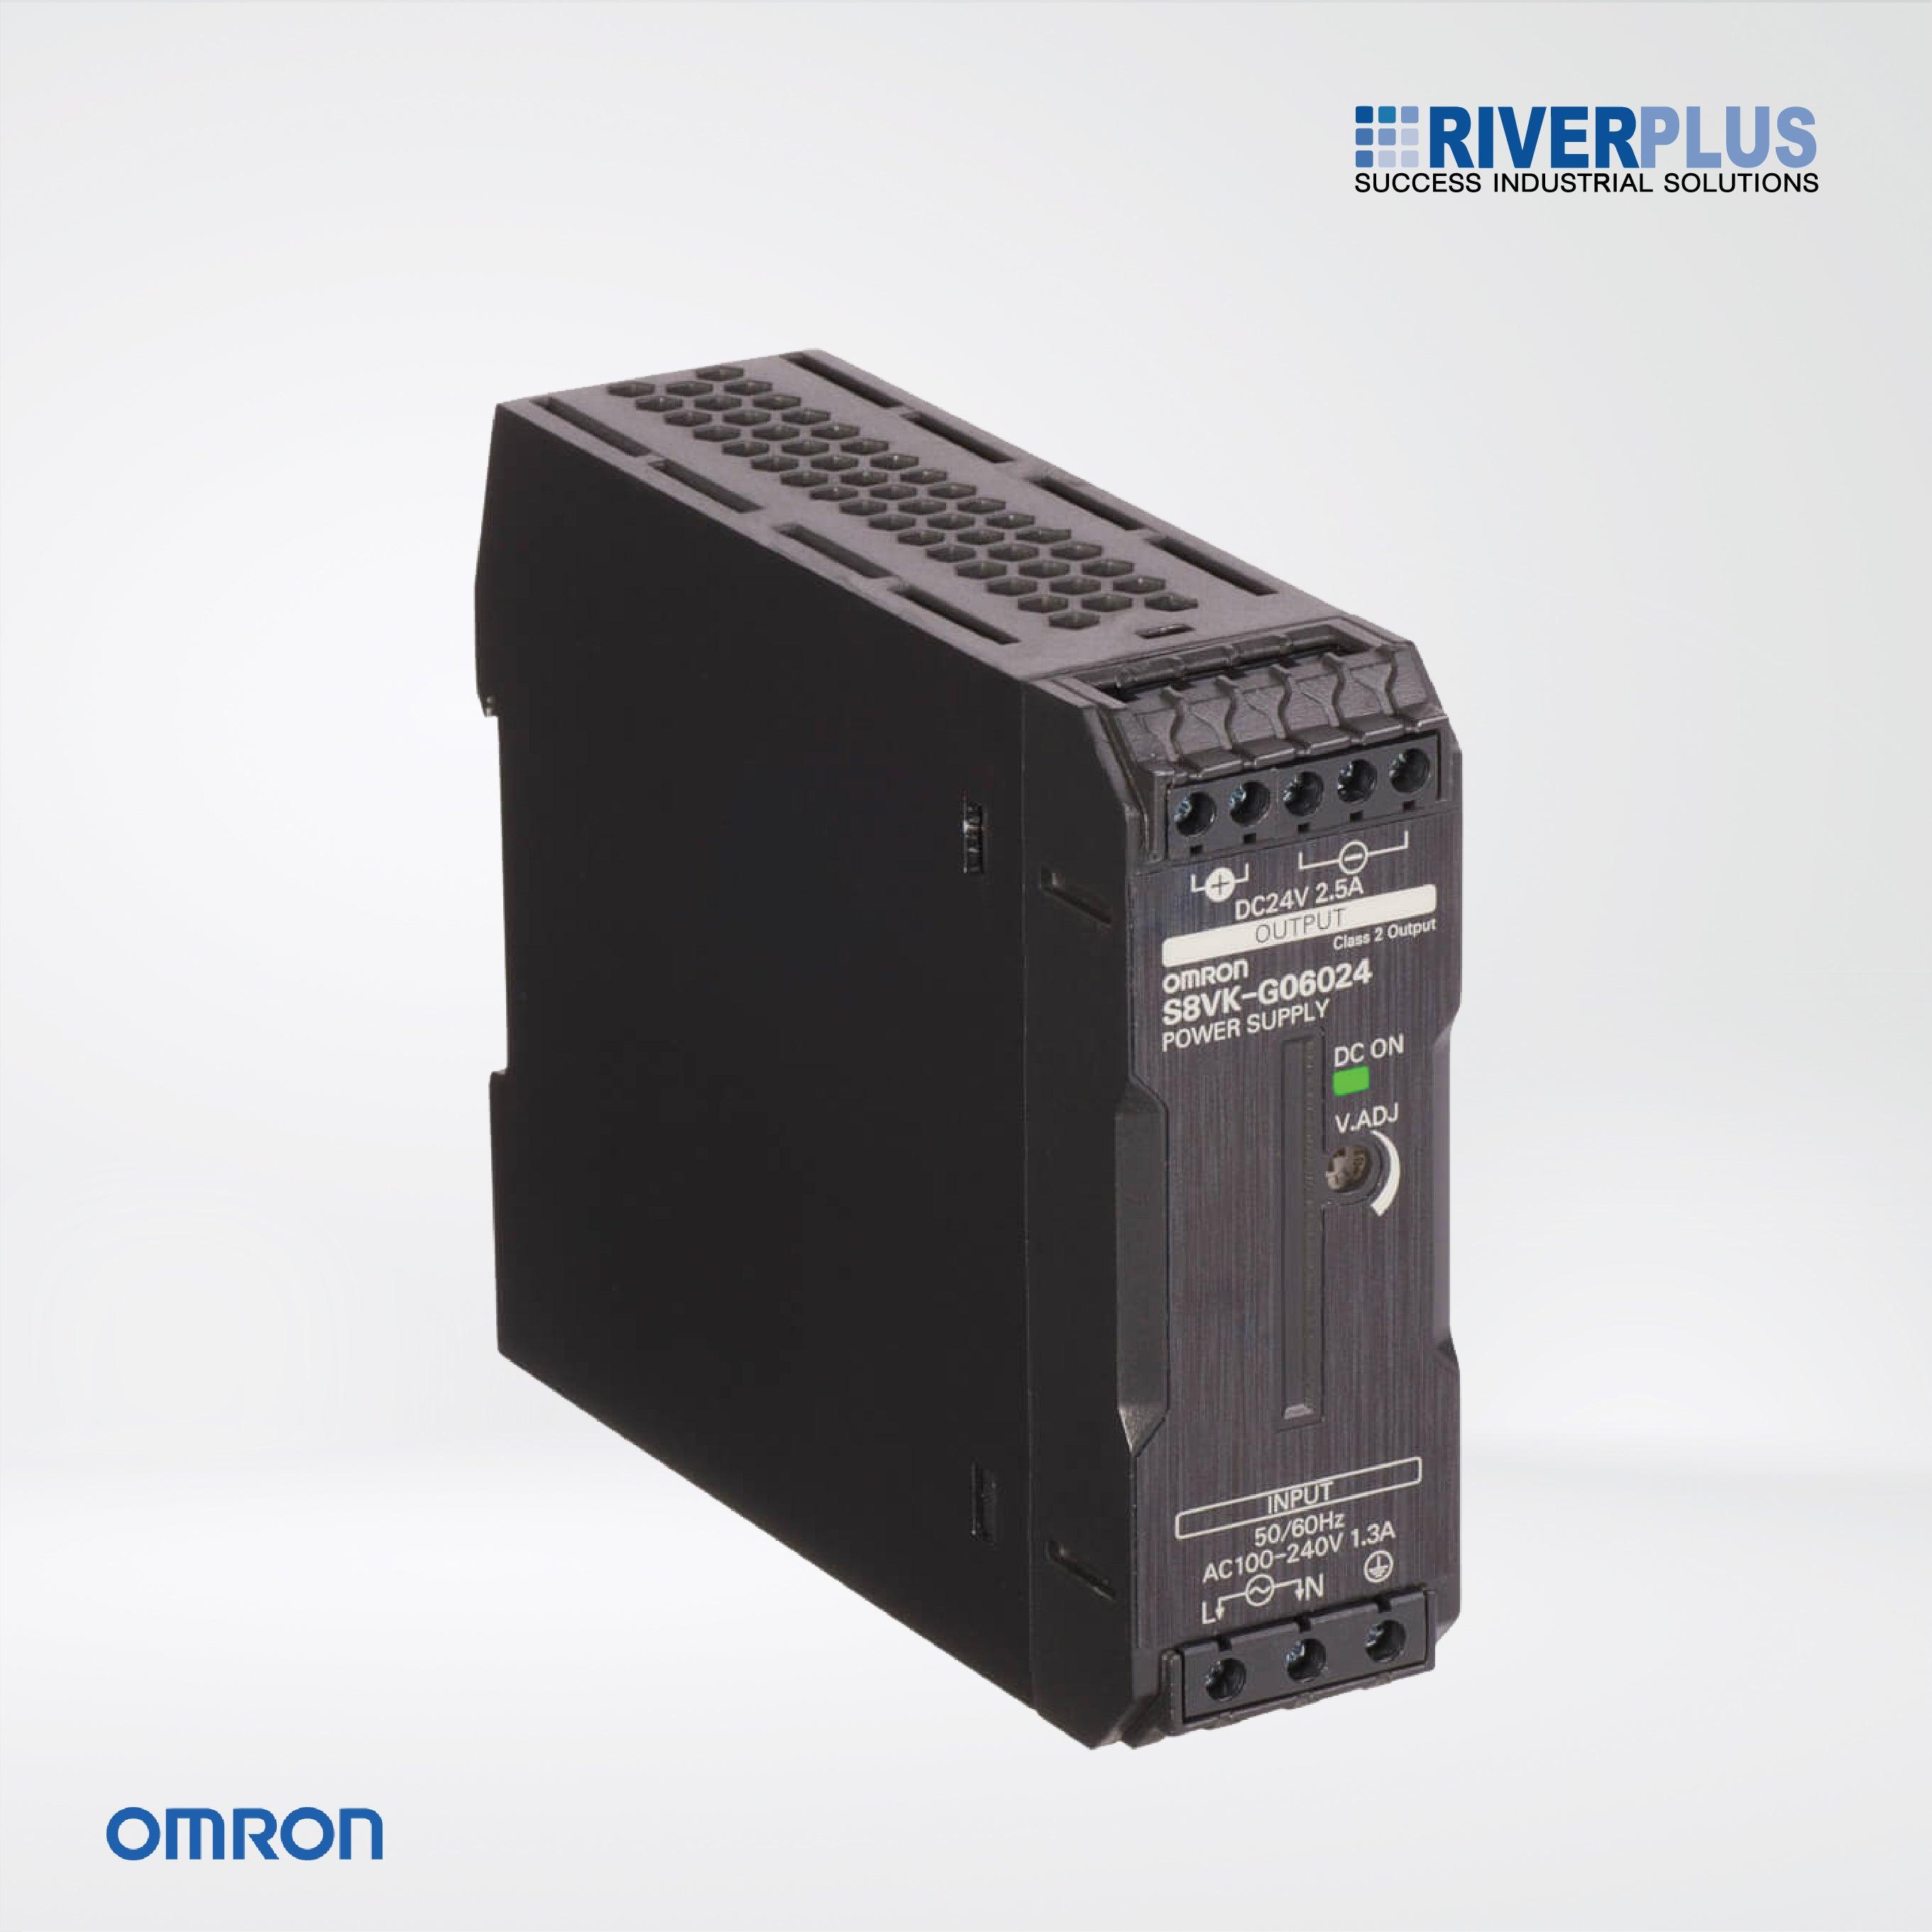 S8VK-G06012 Switch Mode Power Supply , 60W , 12VDC , standard with single-phase input - Riverplus